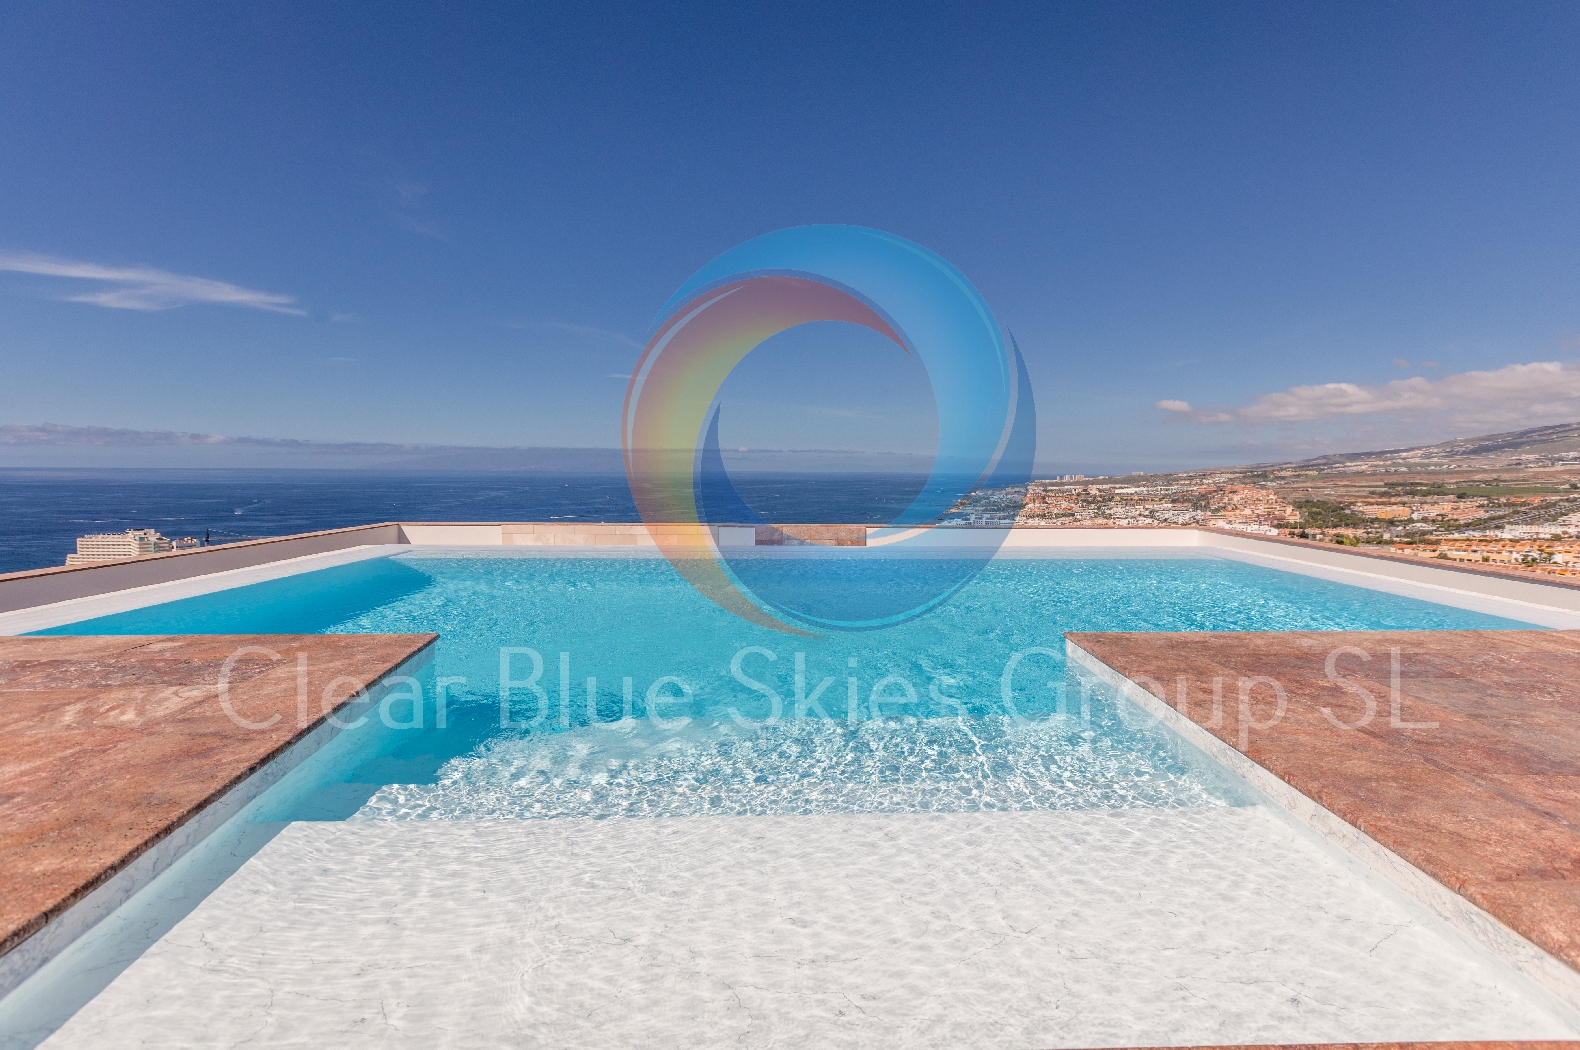 Villa in San Eugenio Alto marketed by Clear Blue Skies